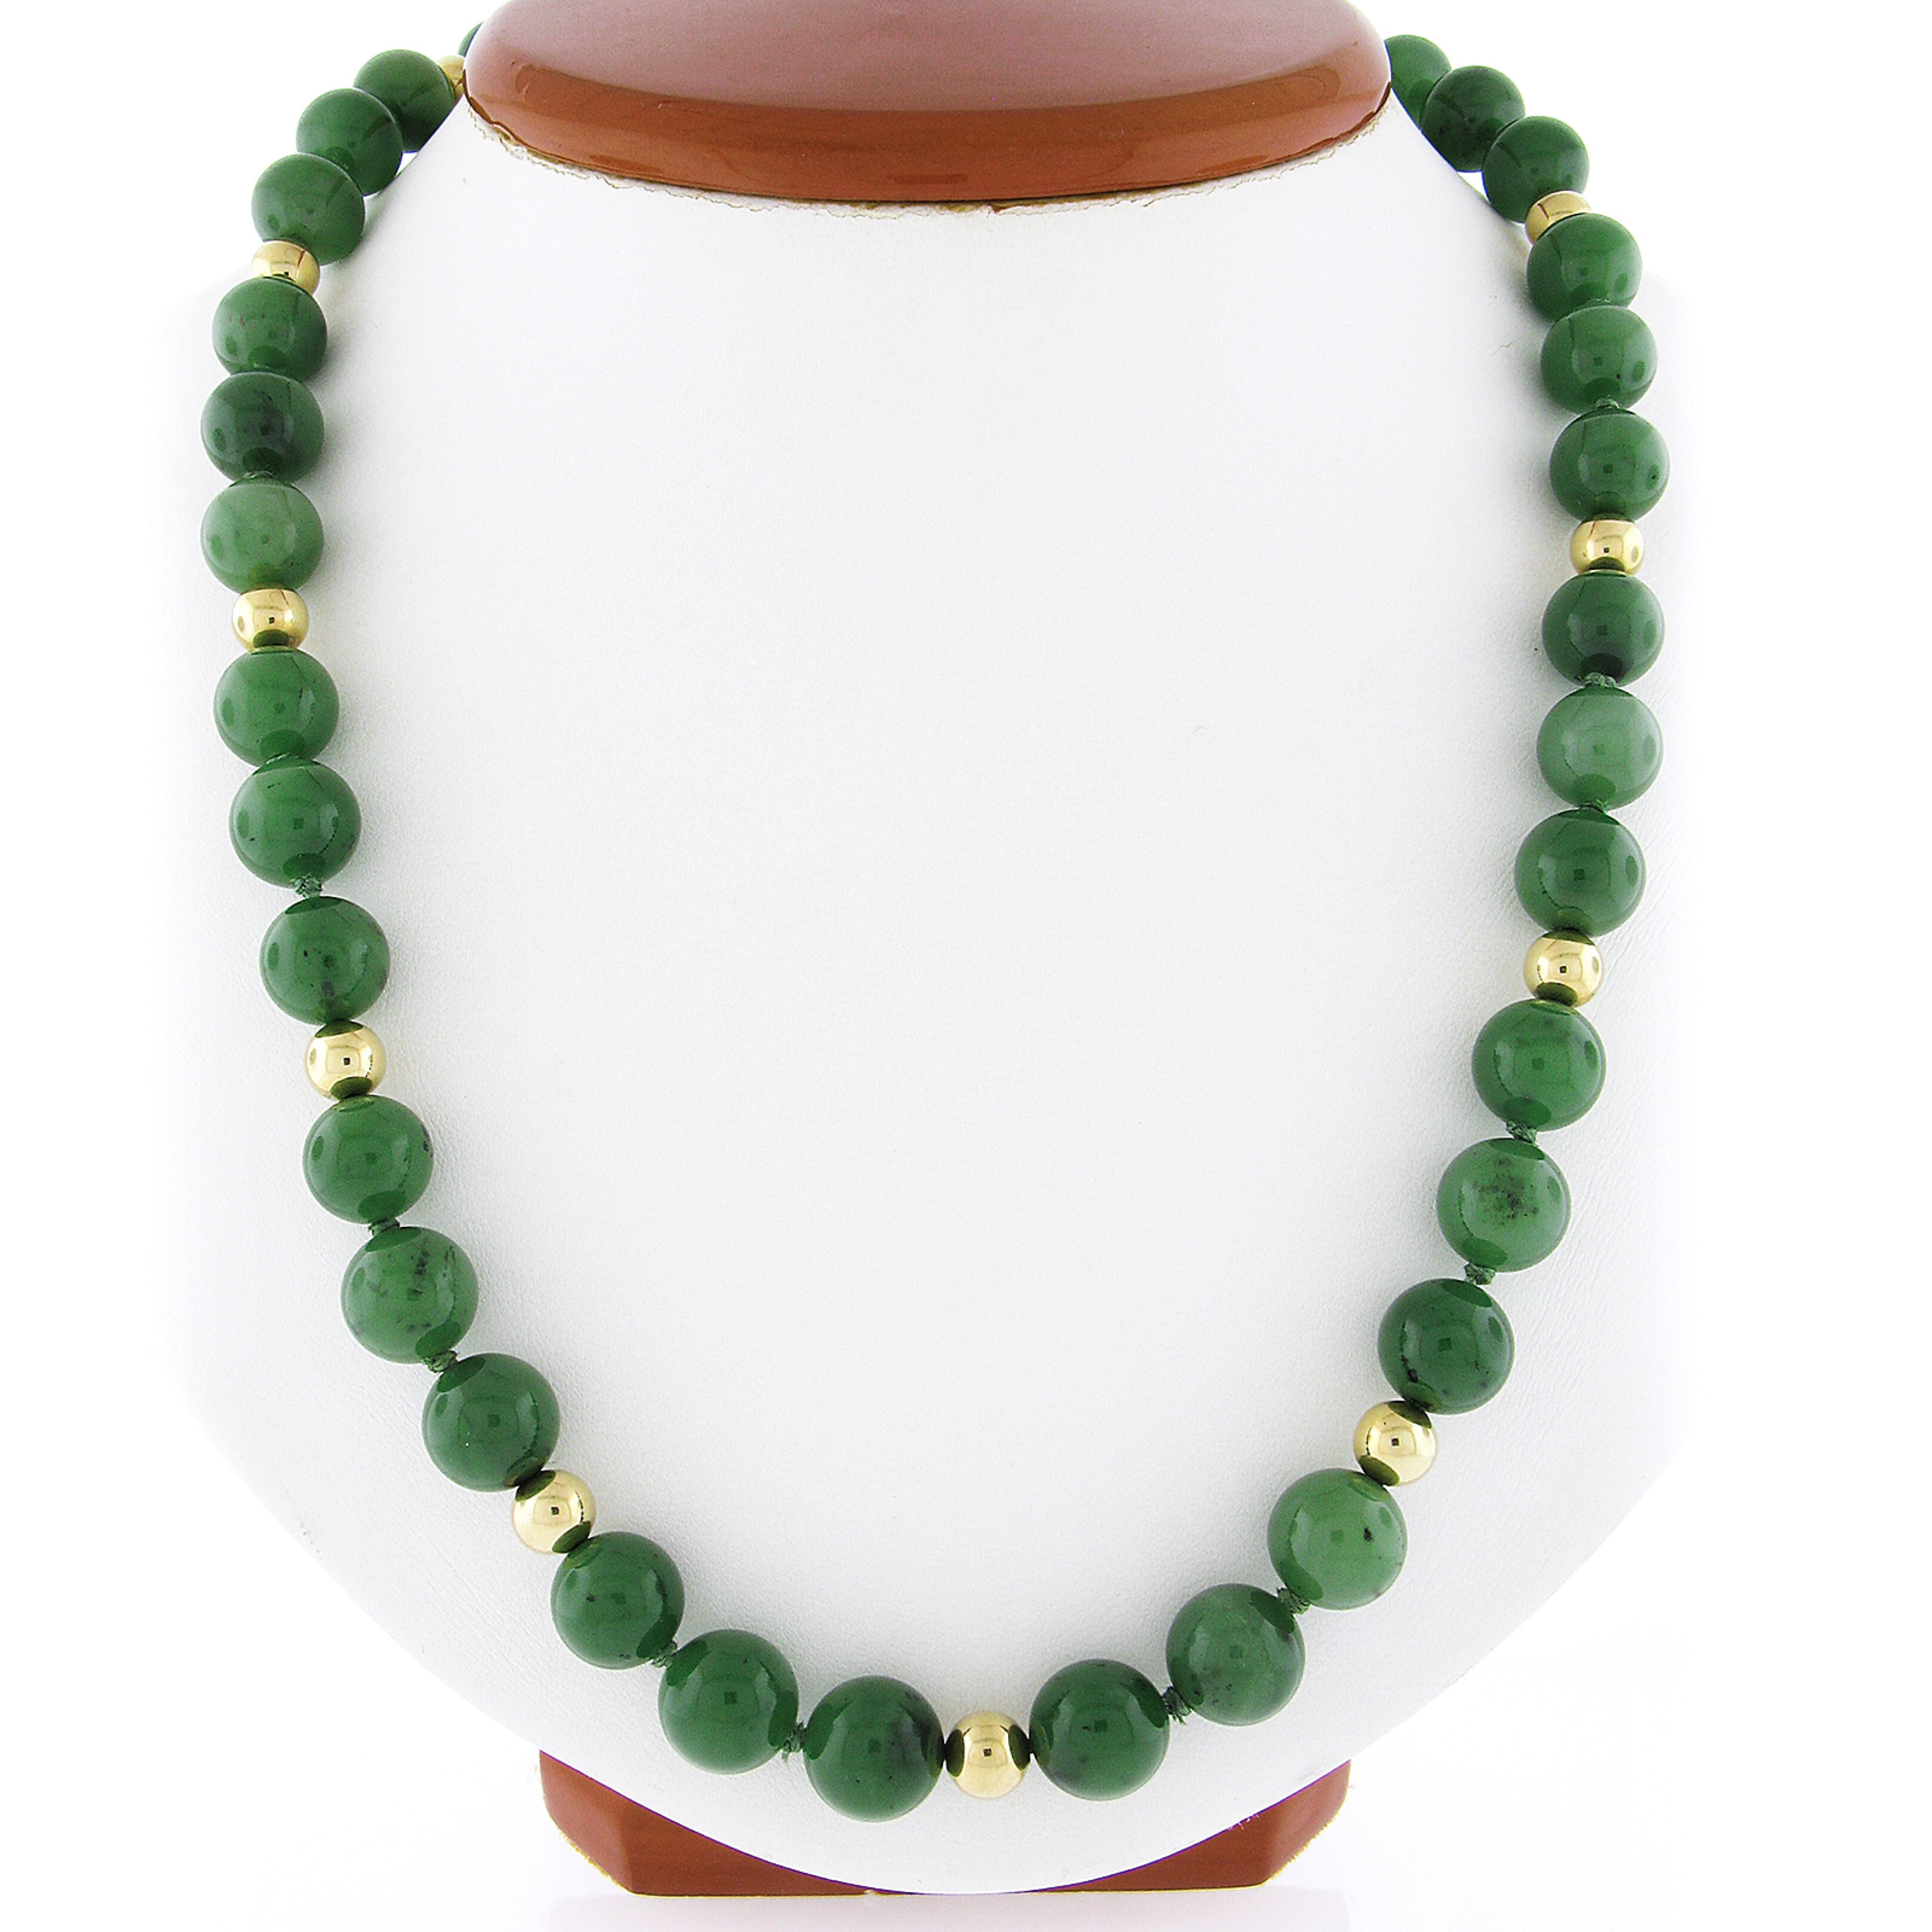 Here we have a magnificent vintage bead strand necklace that features 55 genuine nephrite jade beads that are neatly strung and elegantly accented with 14k yellow gold polished bead stations throughout. These very nice jade beads display beautiful